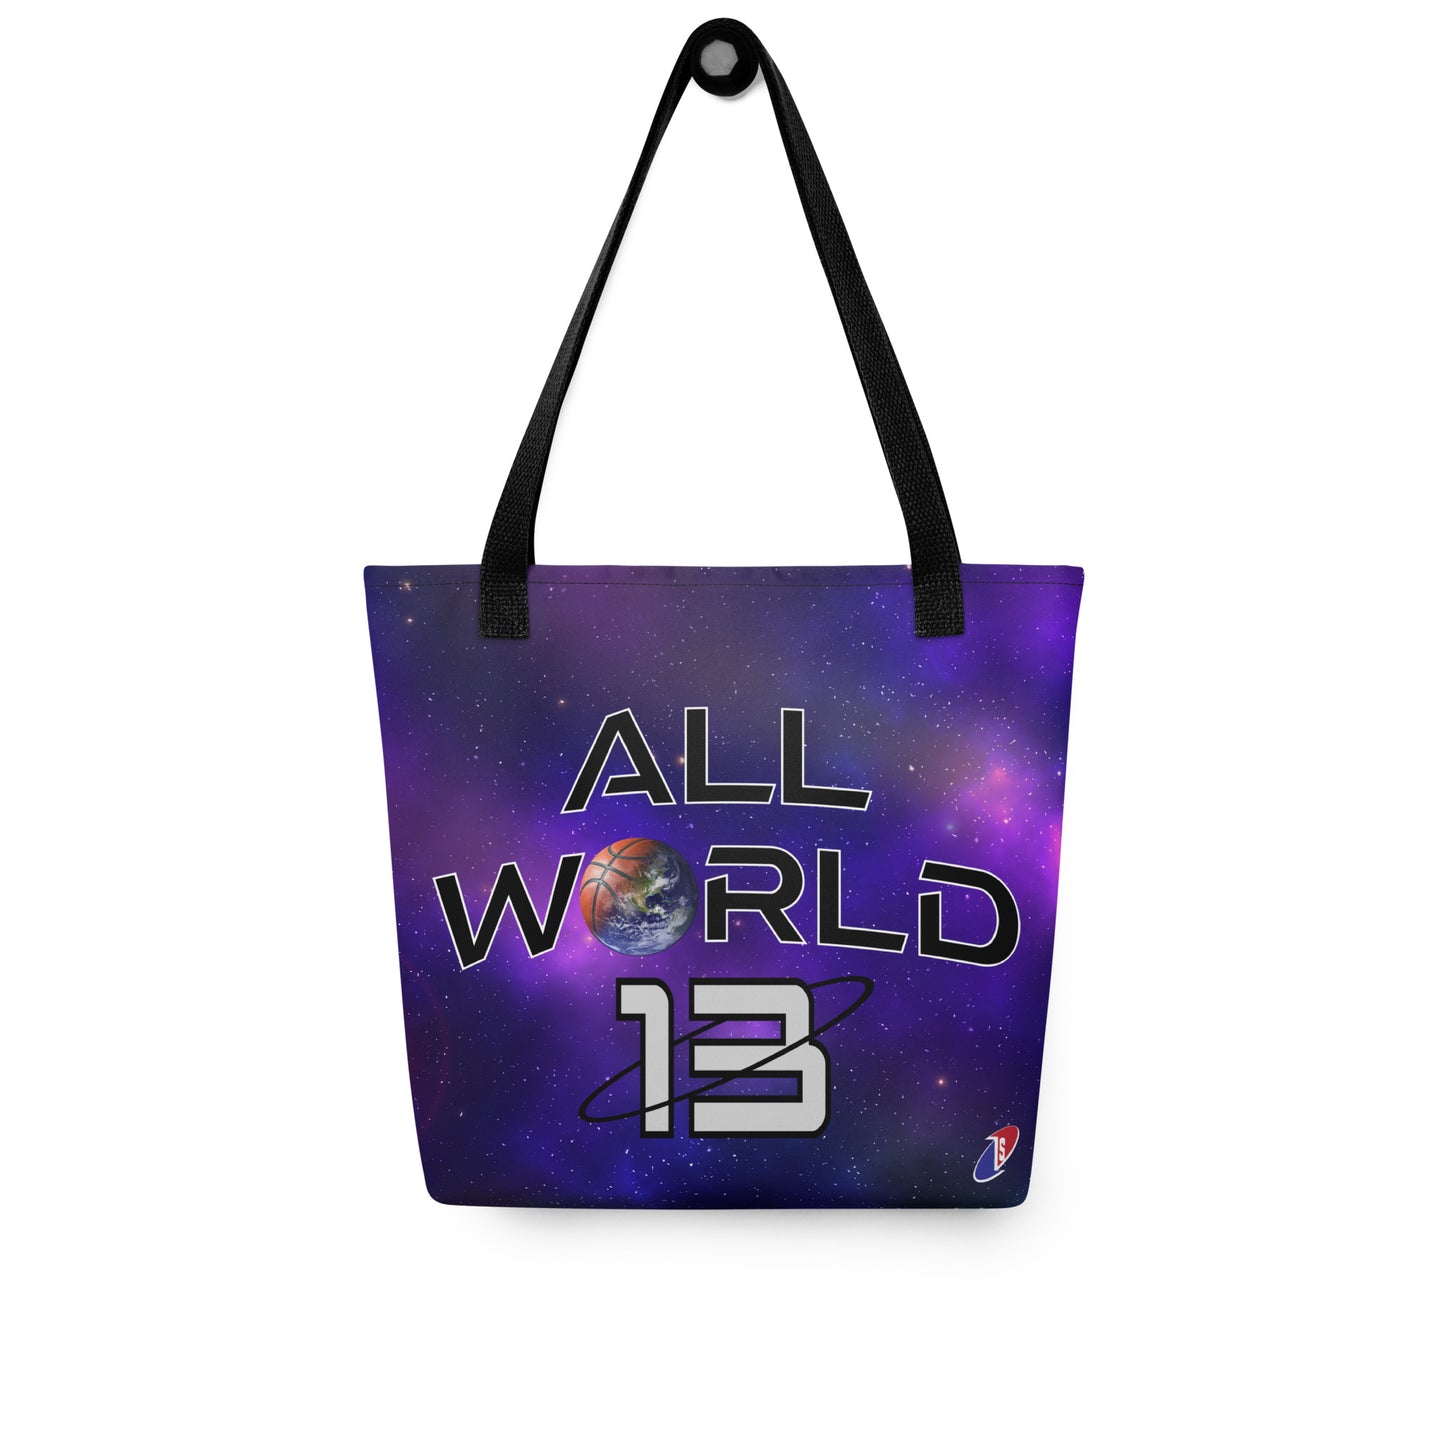 All World Galaxy Tote bag (Customize)